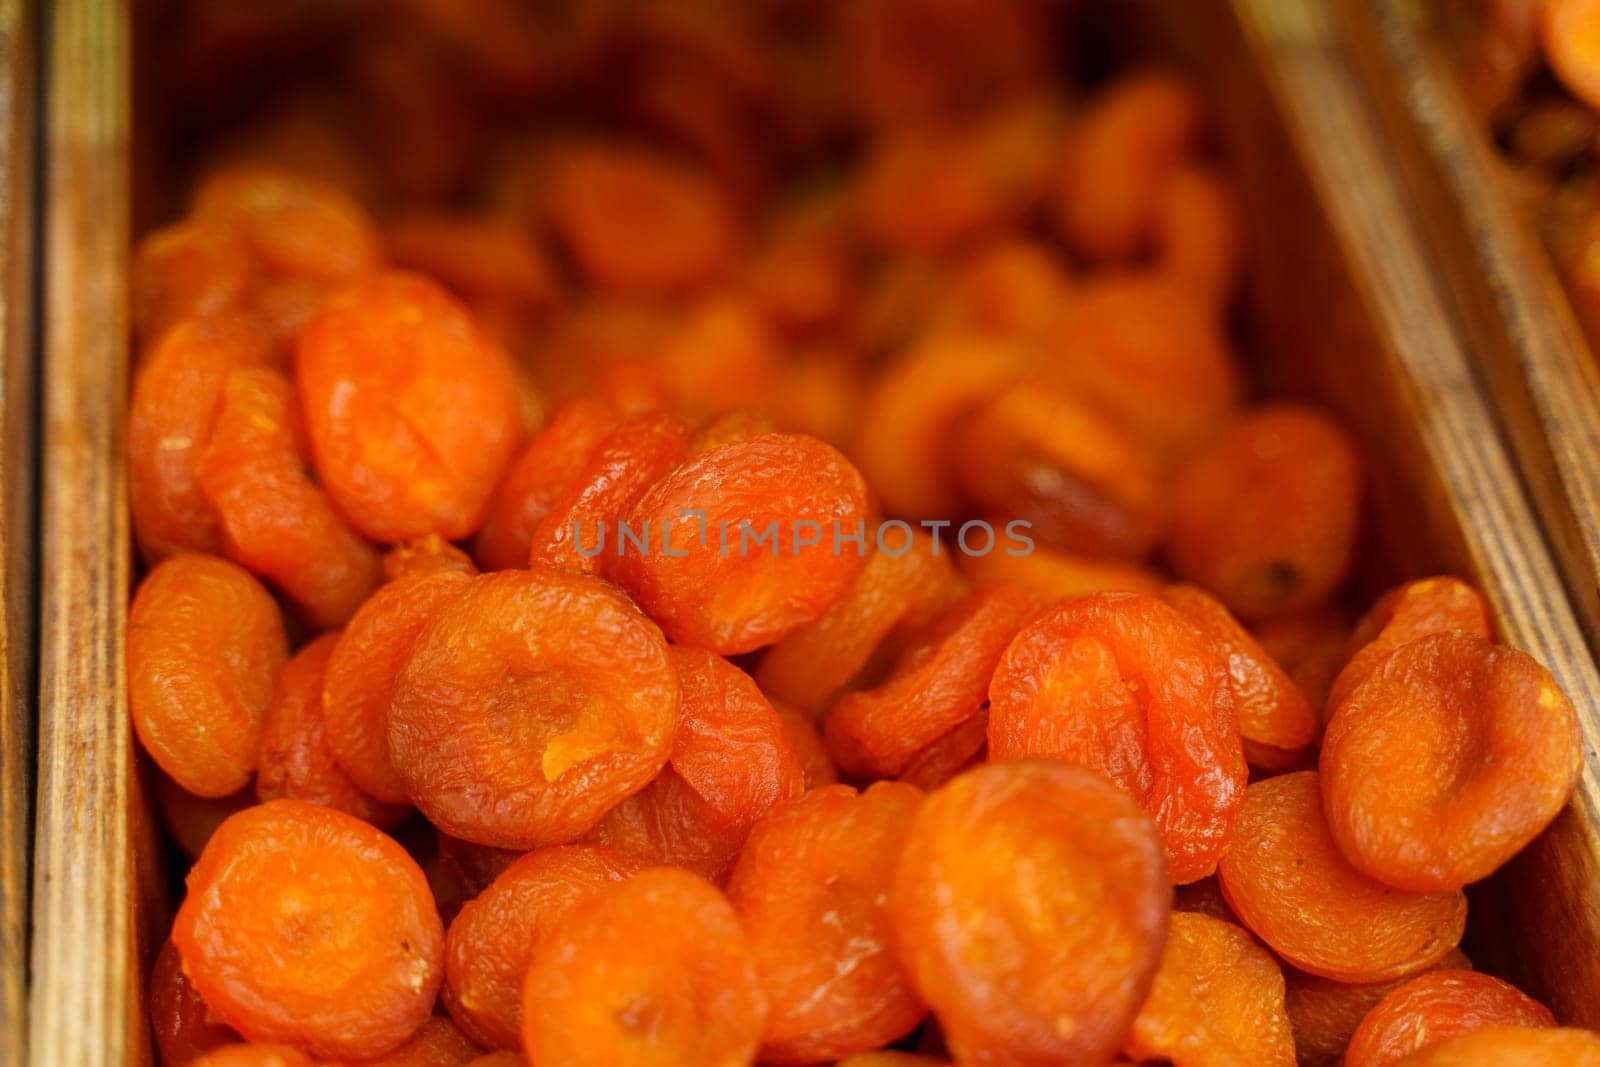 A selection of golden dried apricots showcased for sale, capturing their wrinkled texture and vibrant orange hue.